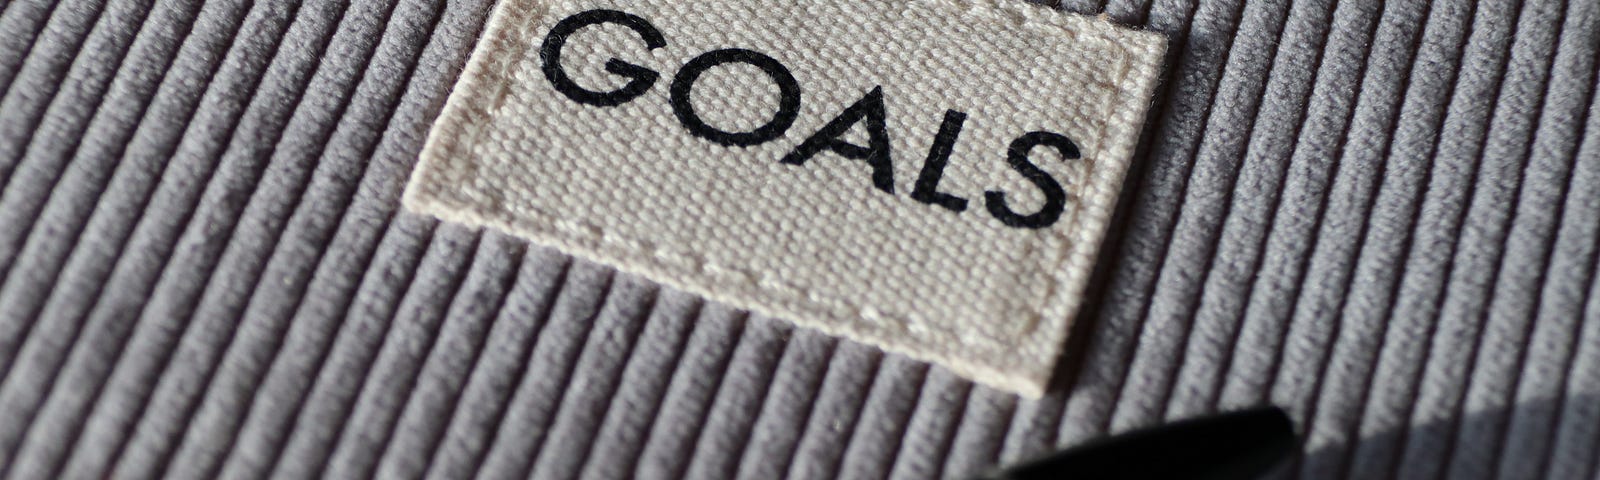 A grey book cover with a white label that says, “Goals.”